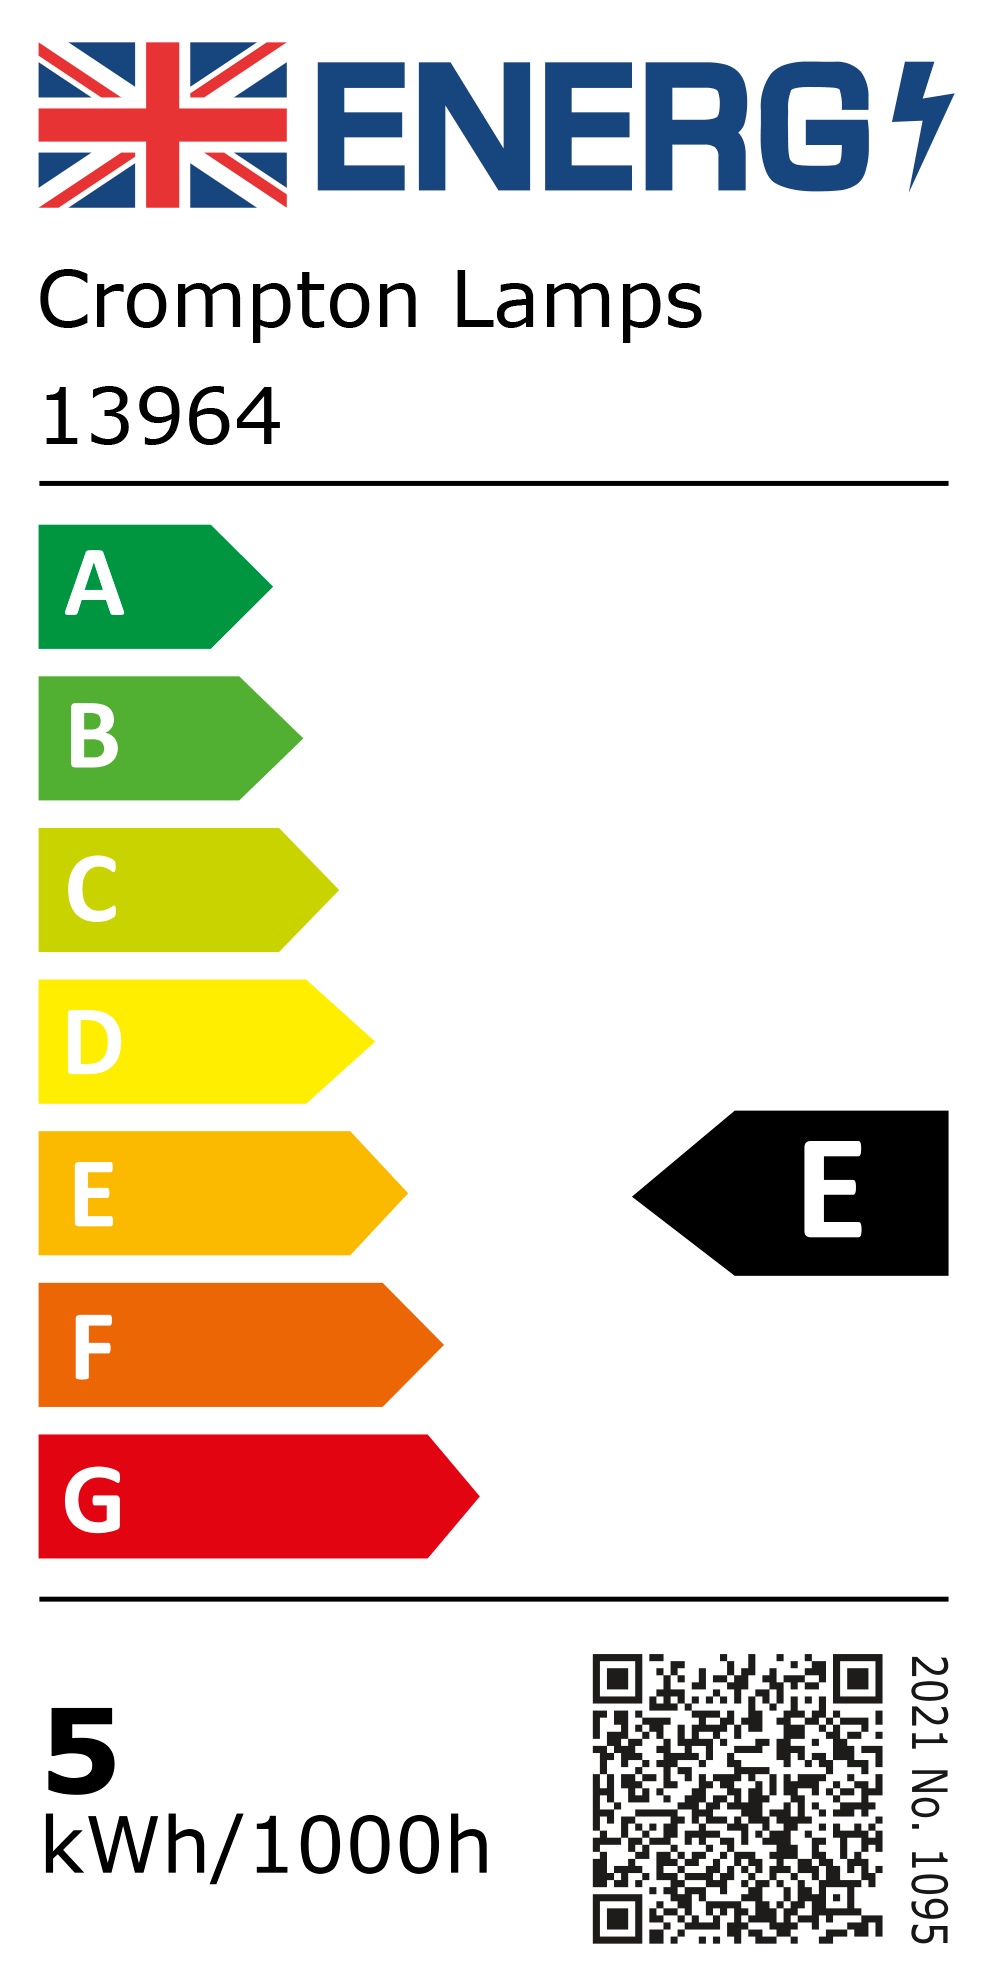 New 2021 Energy Rating Label: MPN 13964